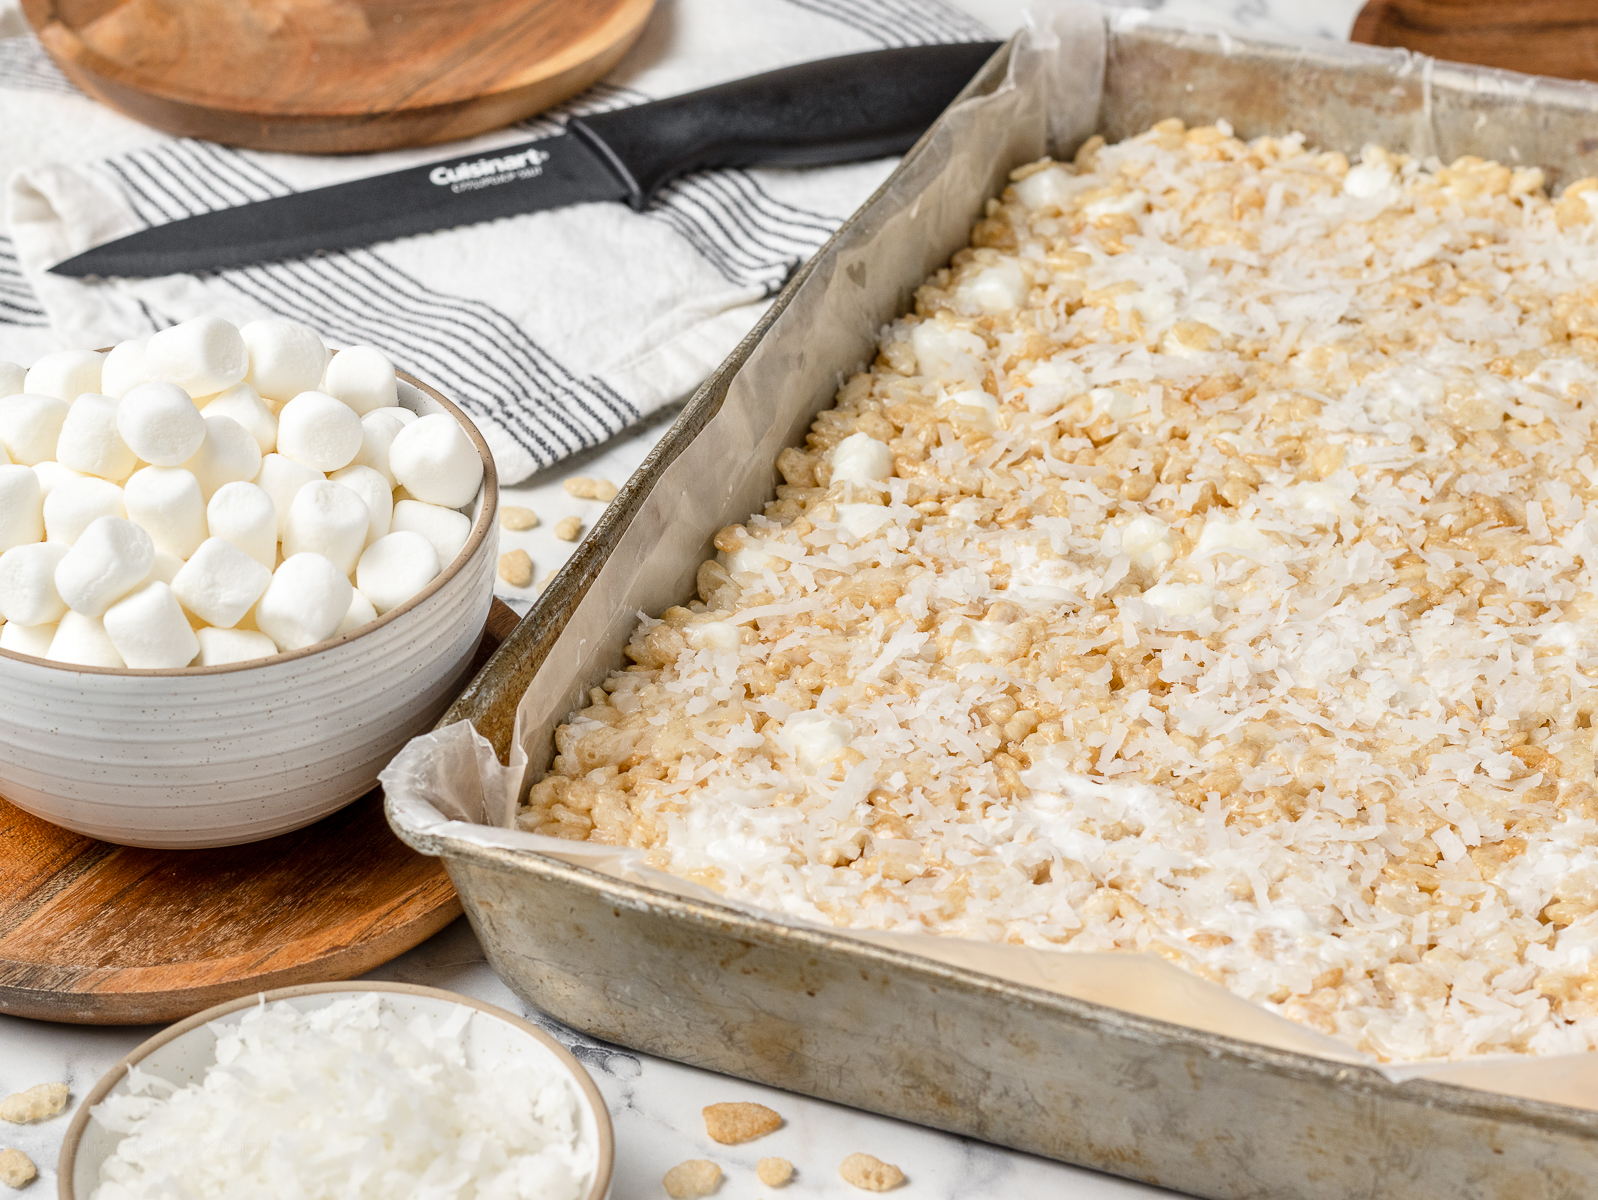 Coconut Rice Krispie Treats in a pan with the knife on the side ready to cut into squares. More sweetened coconut flakes on the side and mini marshmallows.